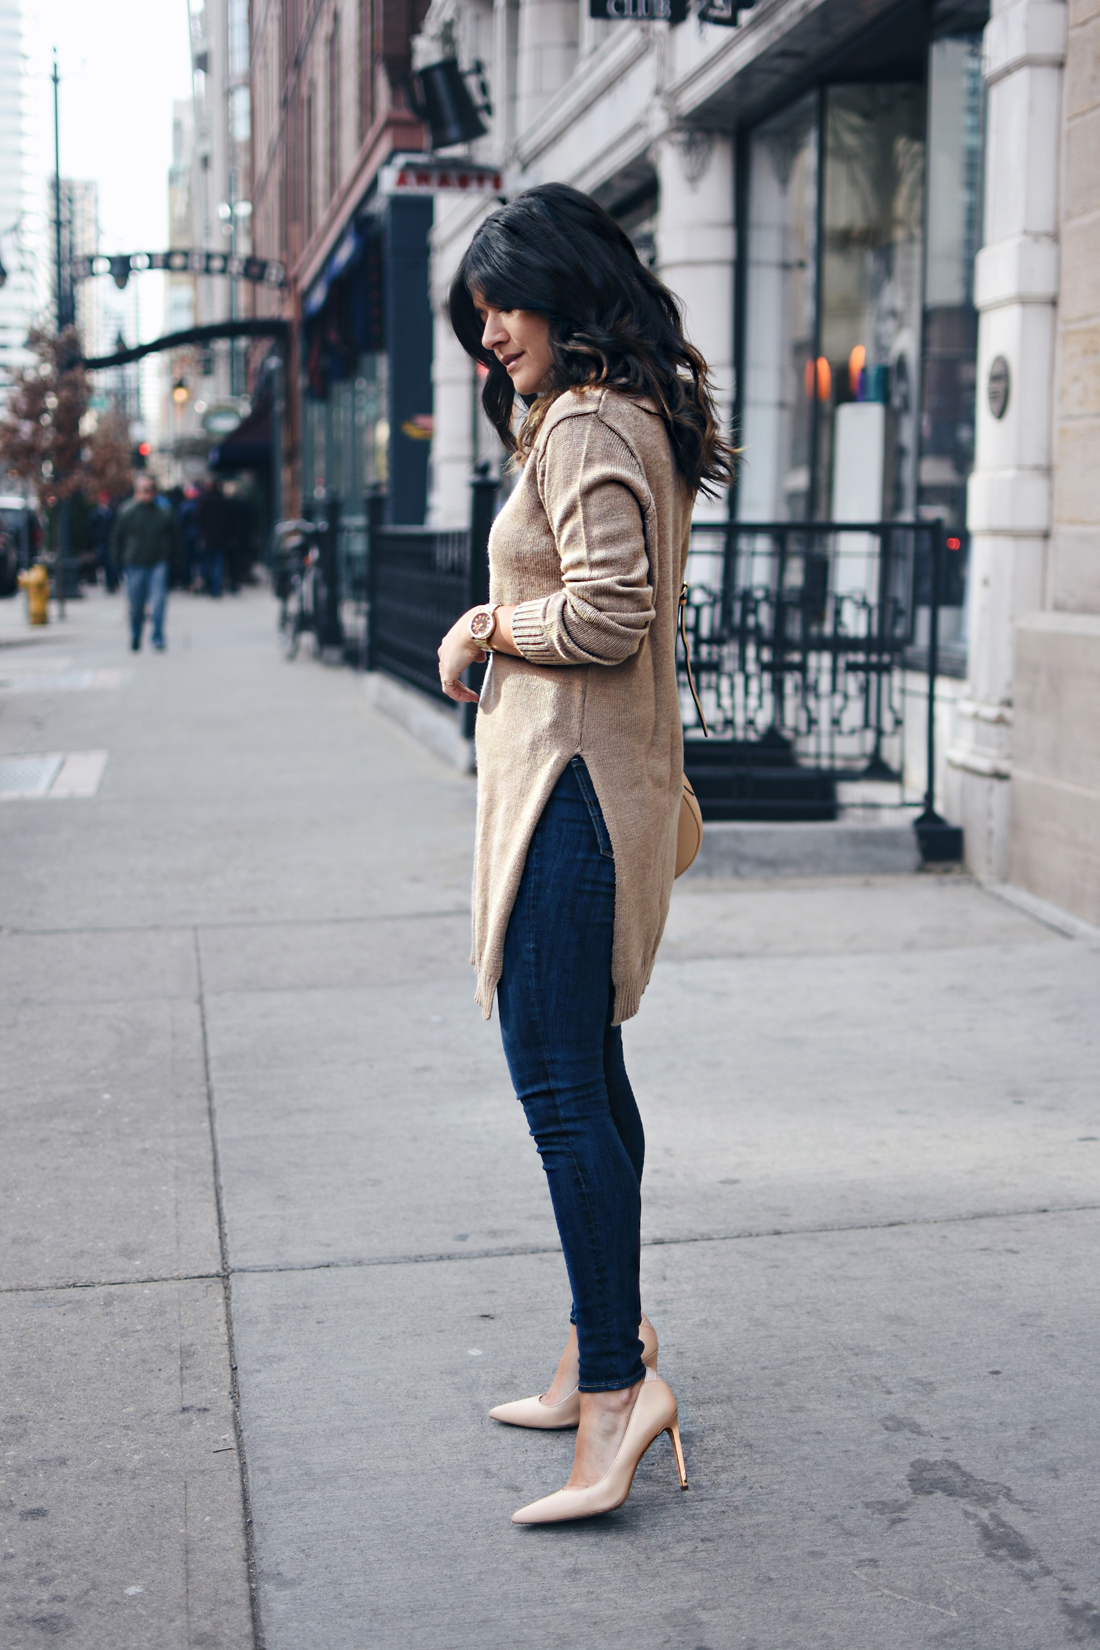 Carolina Hellal of Chic Talk wearing a NA-KD sweater, Paige skinny jeans and Sam Edelman nude pumps